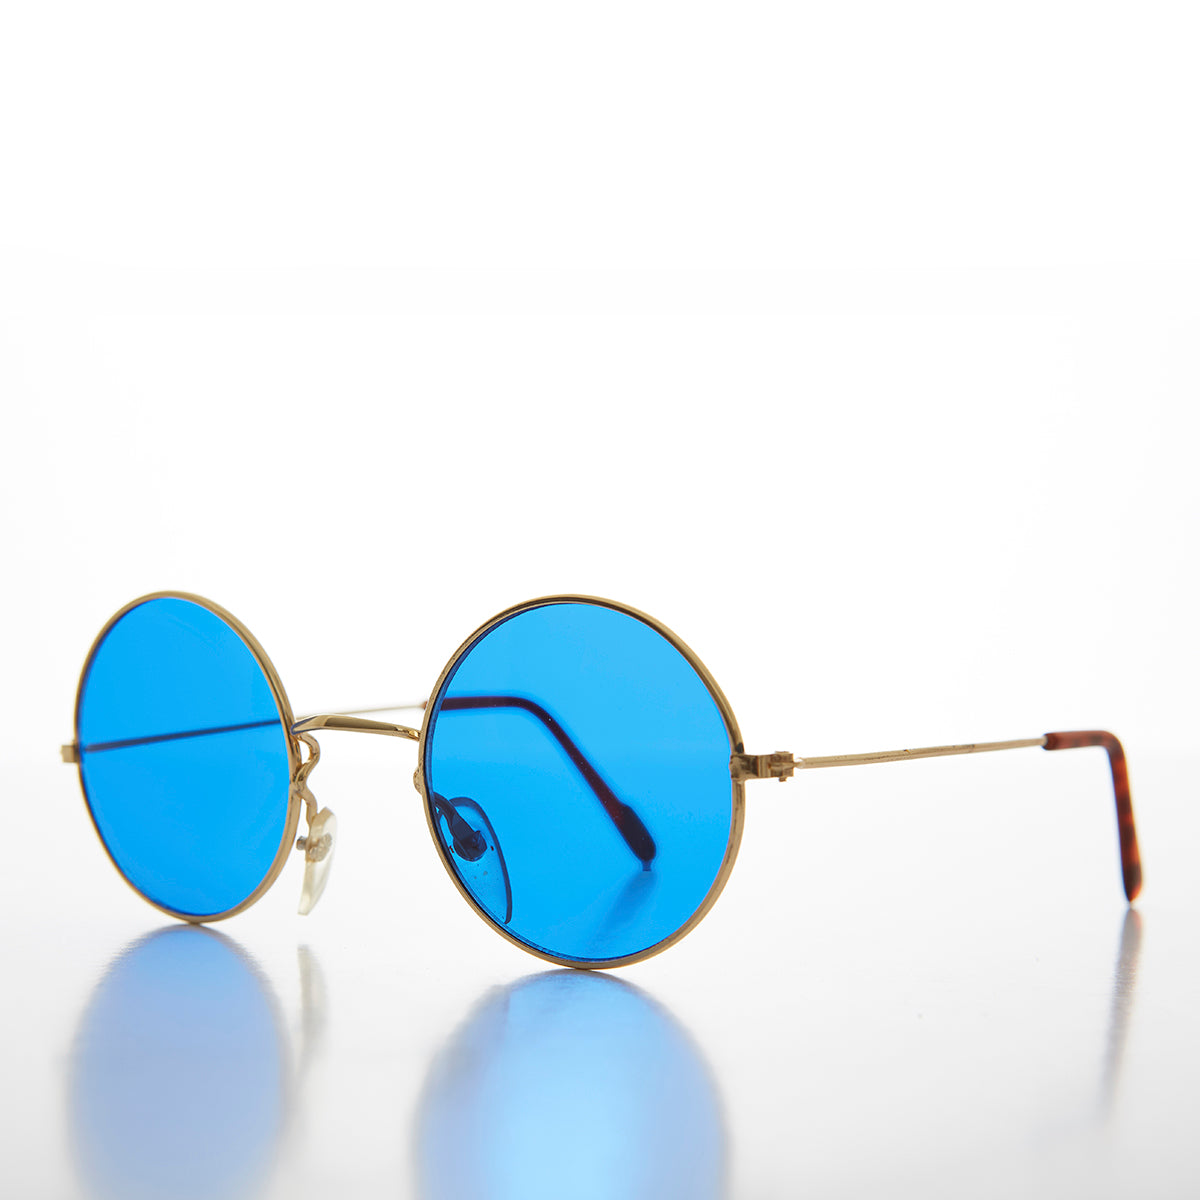 Lenskart - Blue tinted sunglasses have a calming effect on... | Facebook